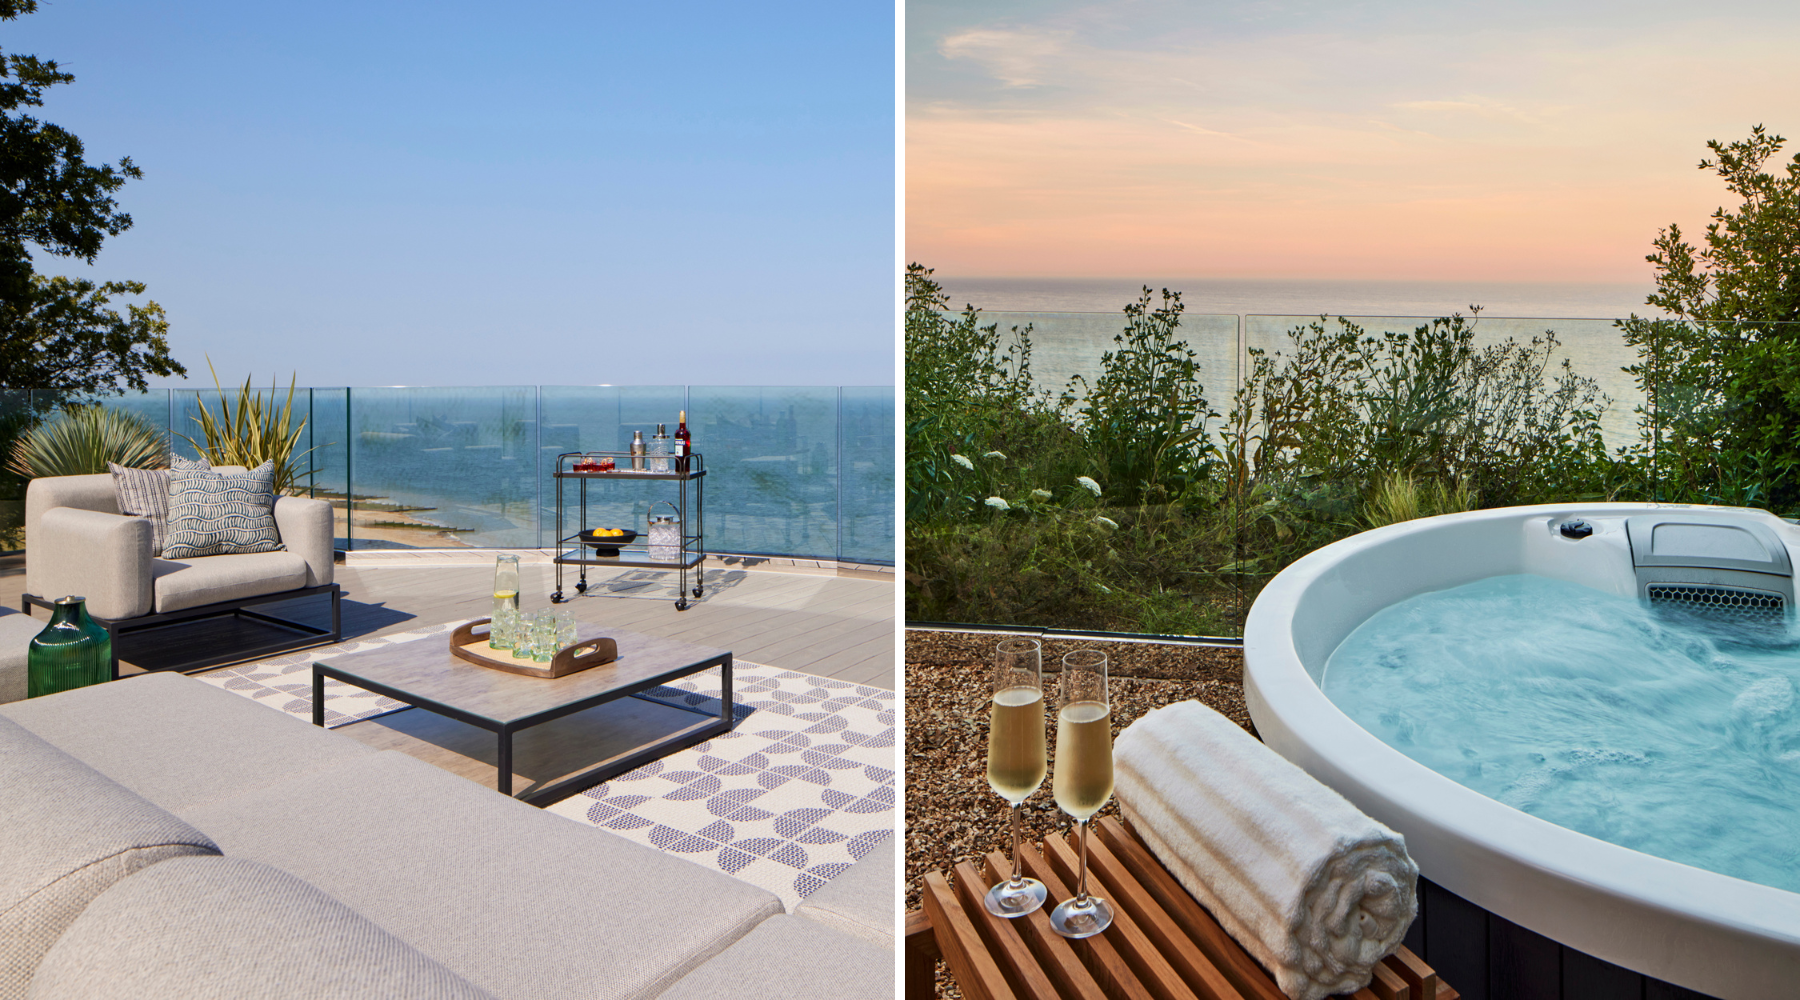 Omaze Million Pound House Draw Kent Rooftop overlooking sea and hot tub with Champagne at sunset